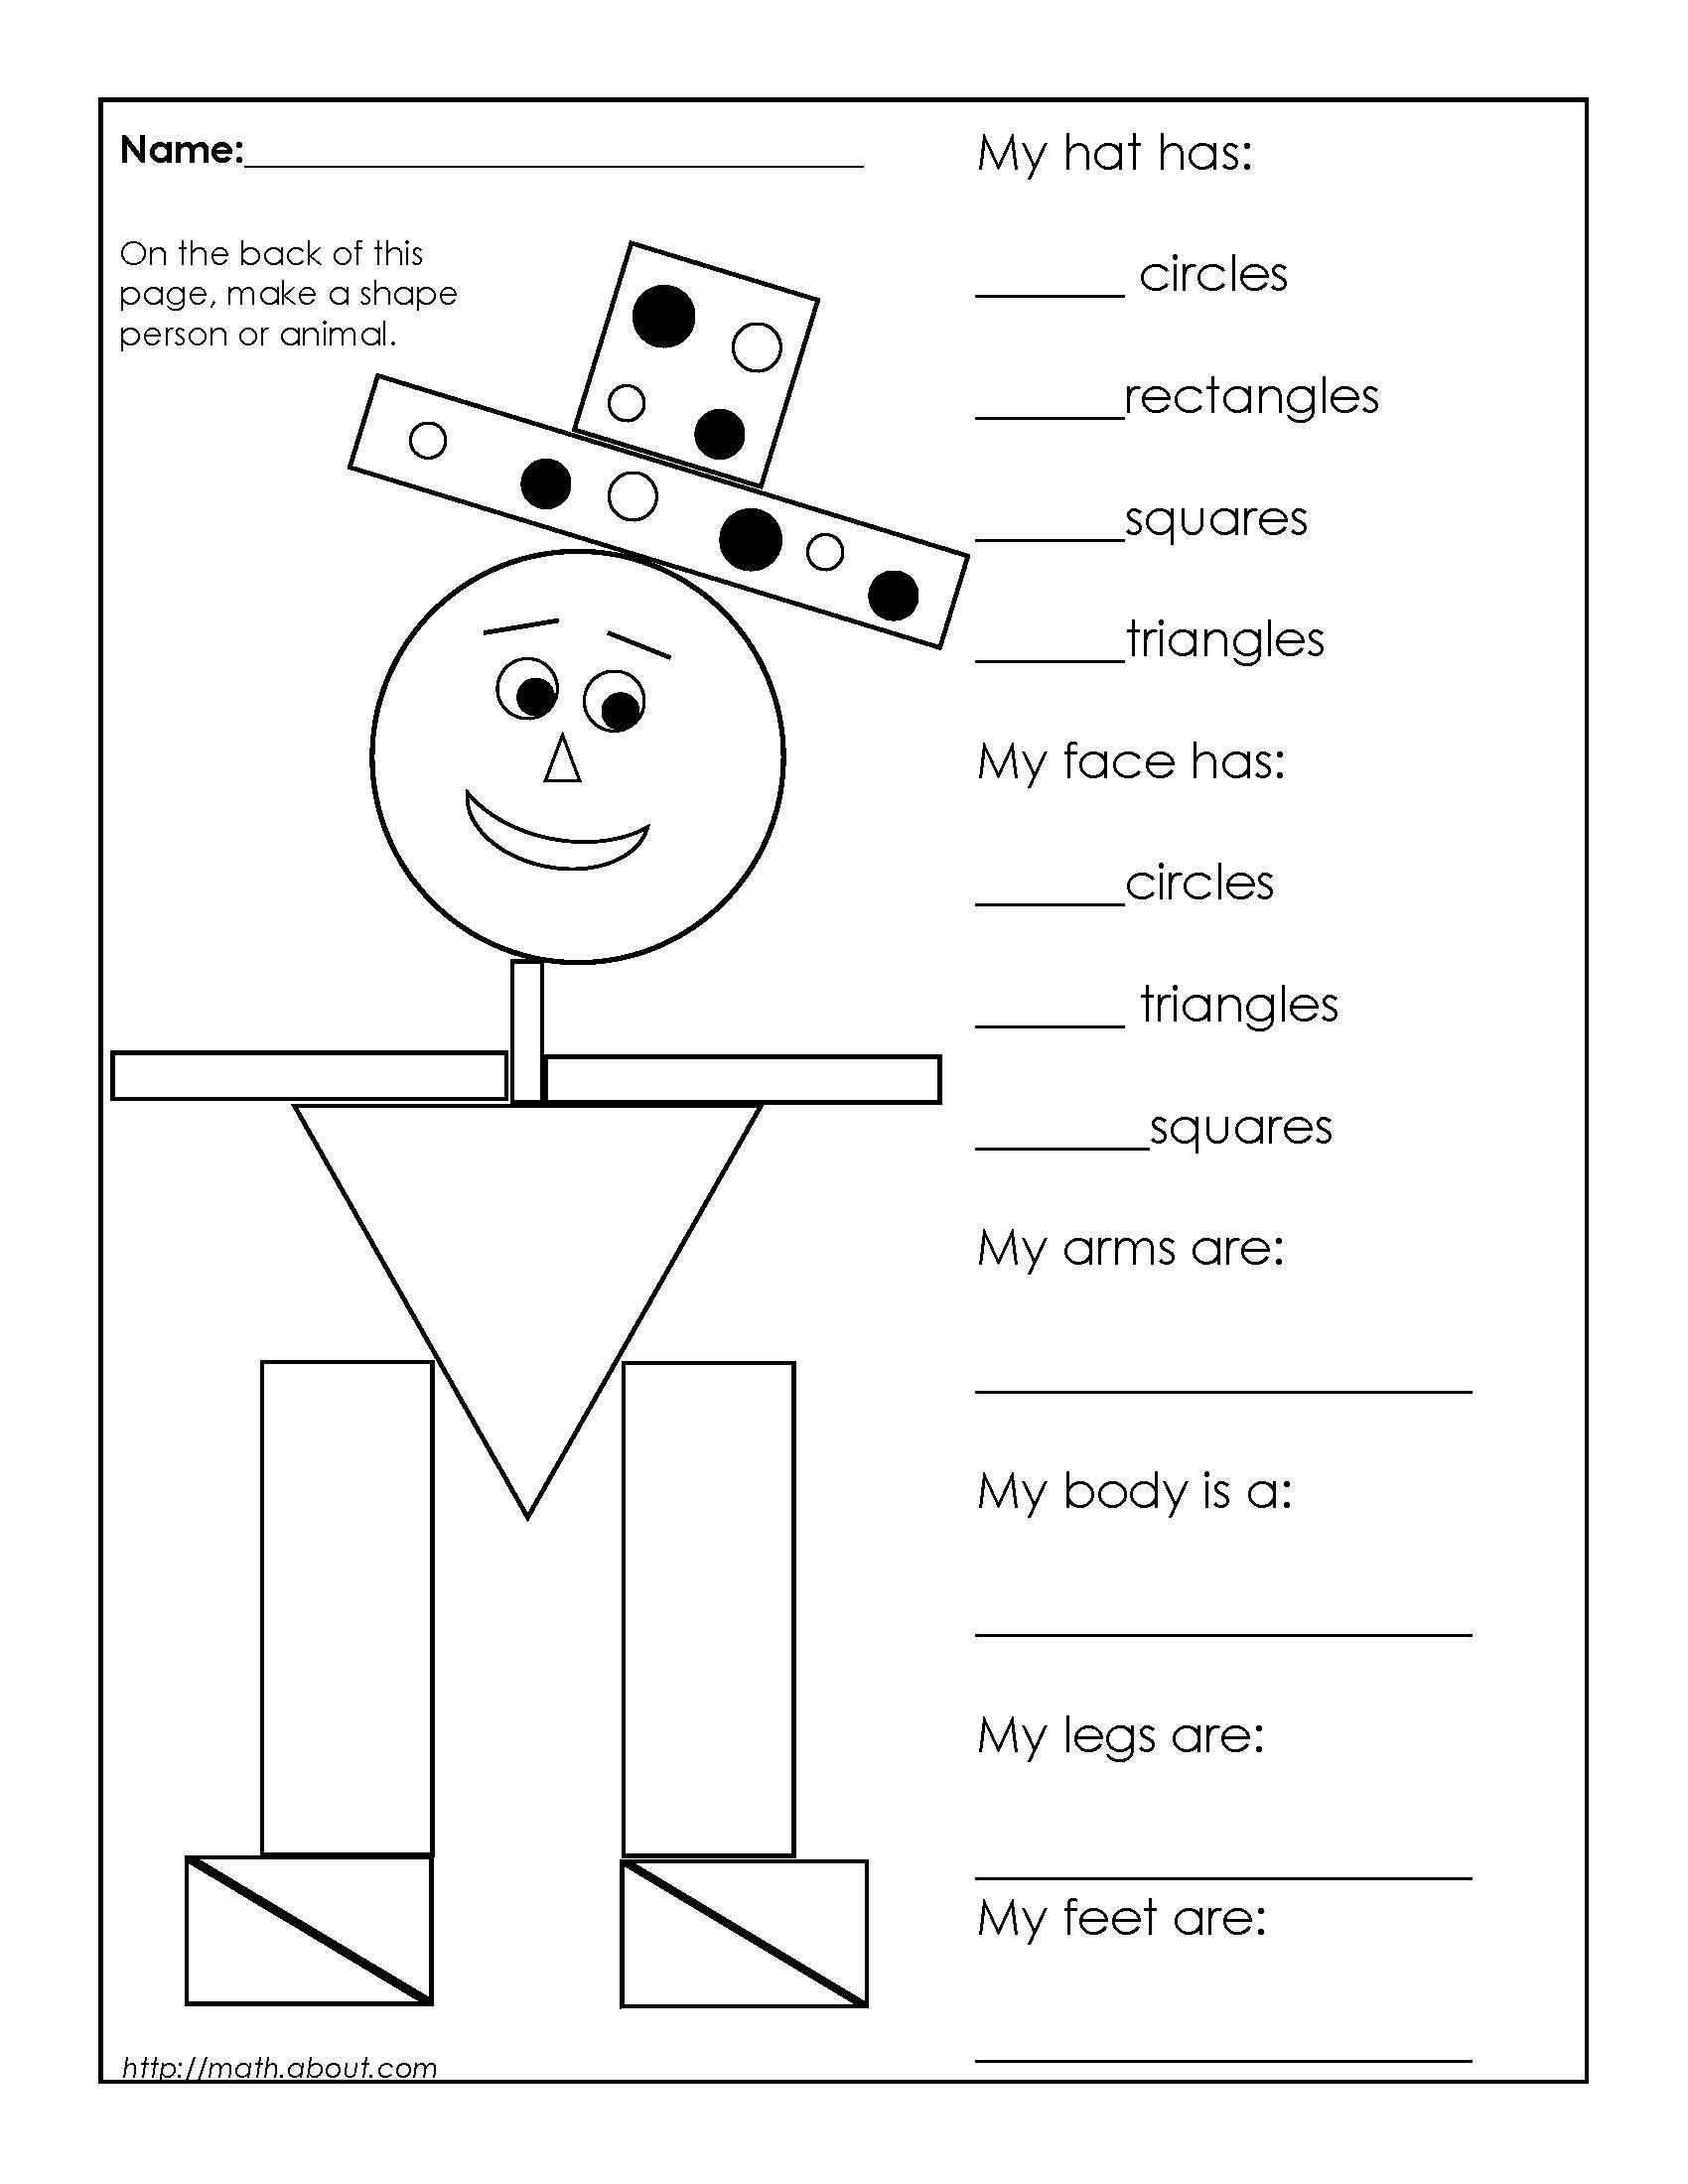 7th Grade Math Worksheets Free Printable with Answers together with 1st Grade Geometry Worksheets for Students